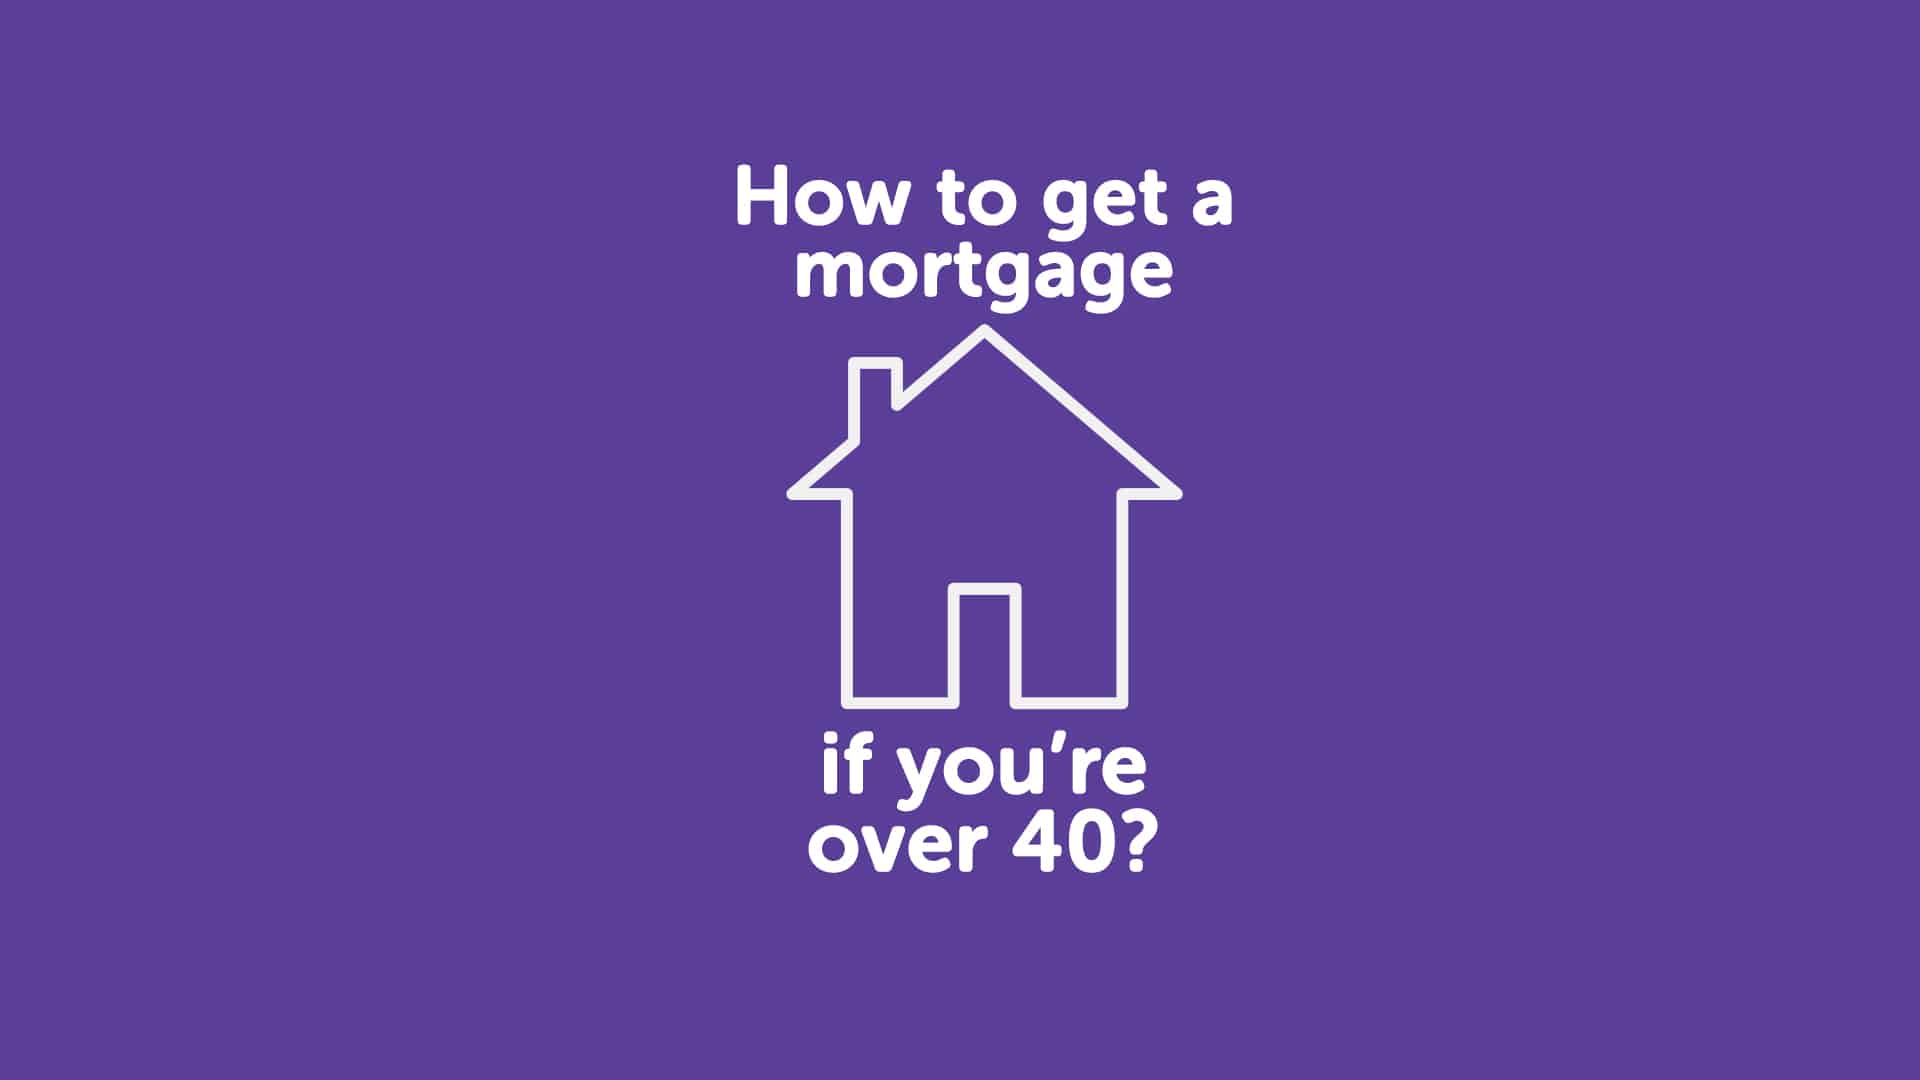 How to Get a Mortgage in Nottingham if You're Over 40